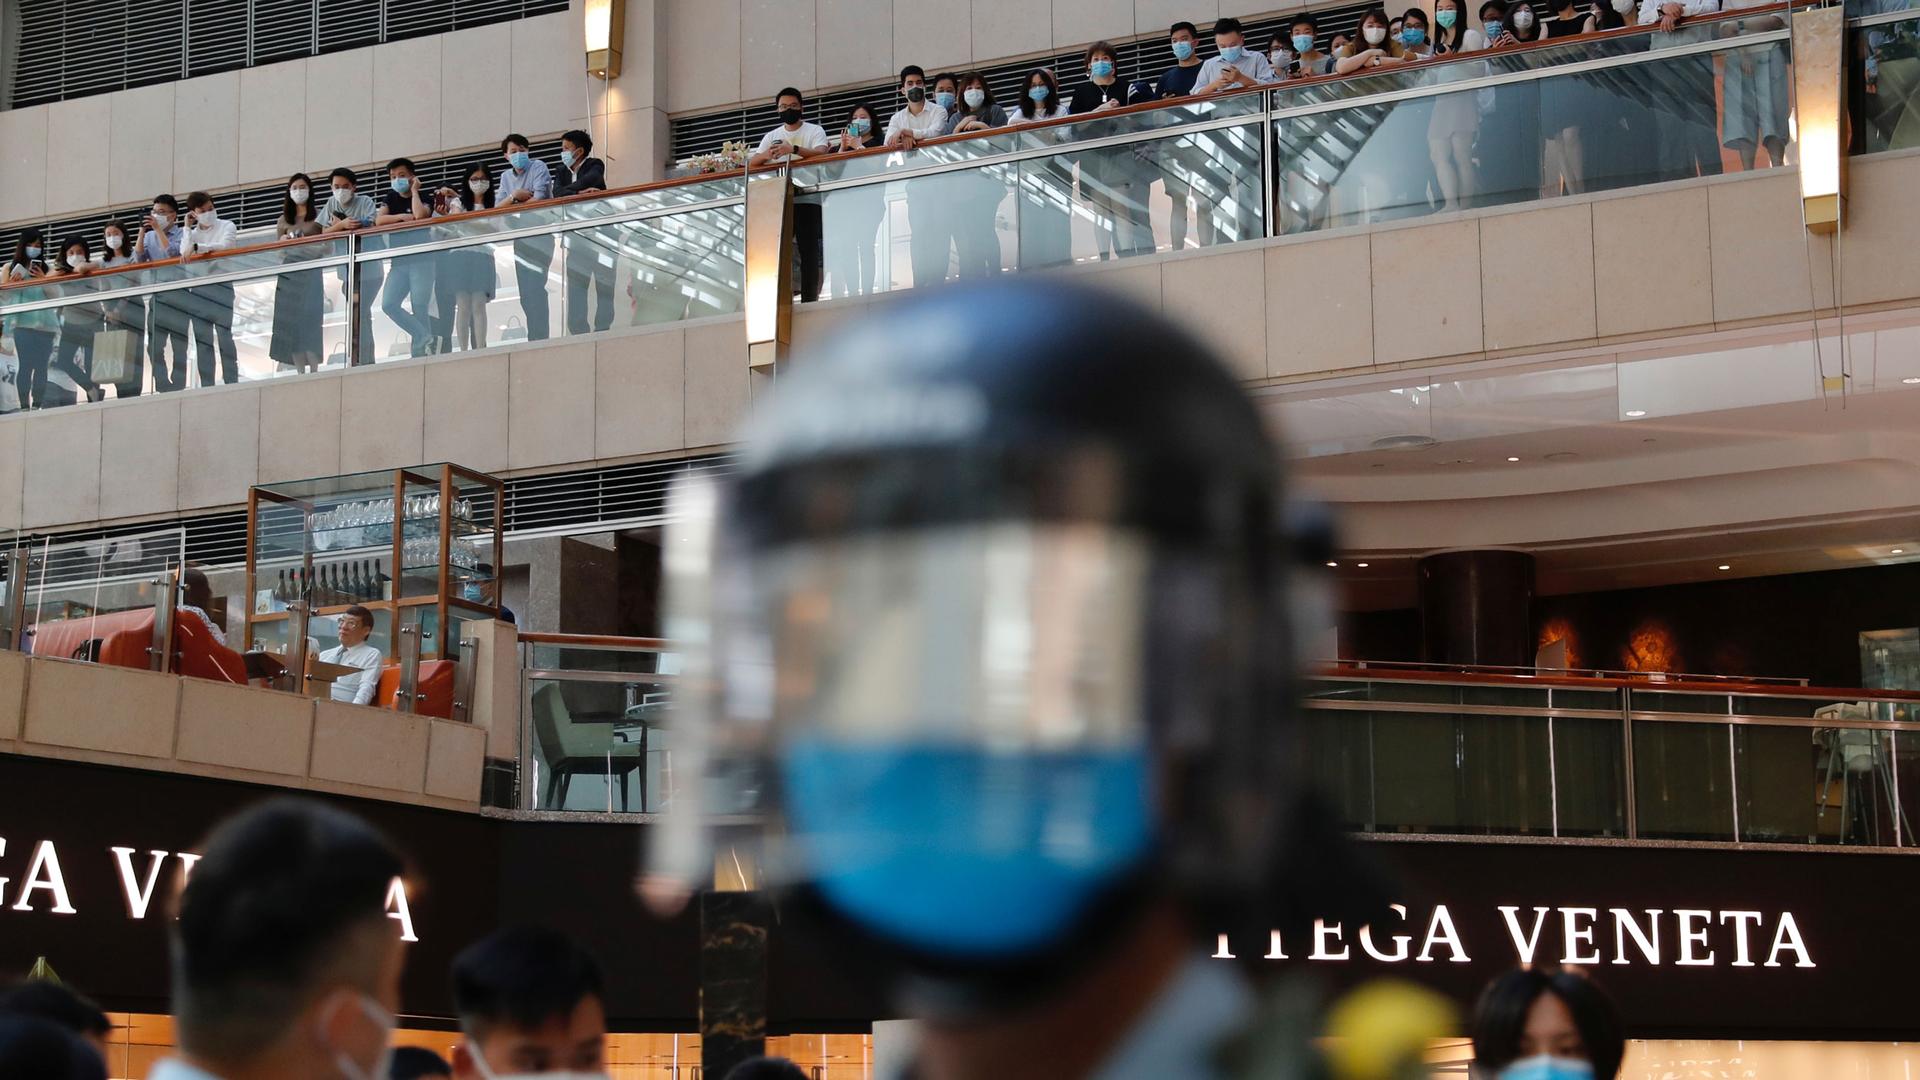 A helmeted head is blurry in the foreground, behind it, a line of protesters on a balcony